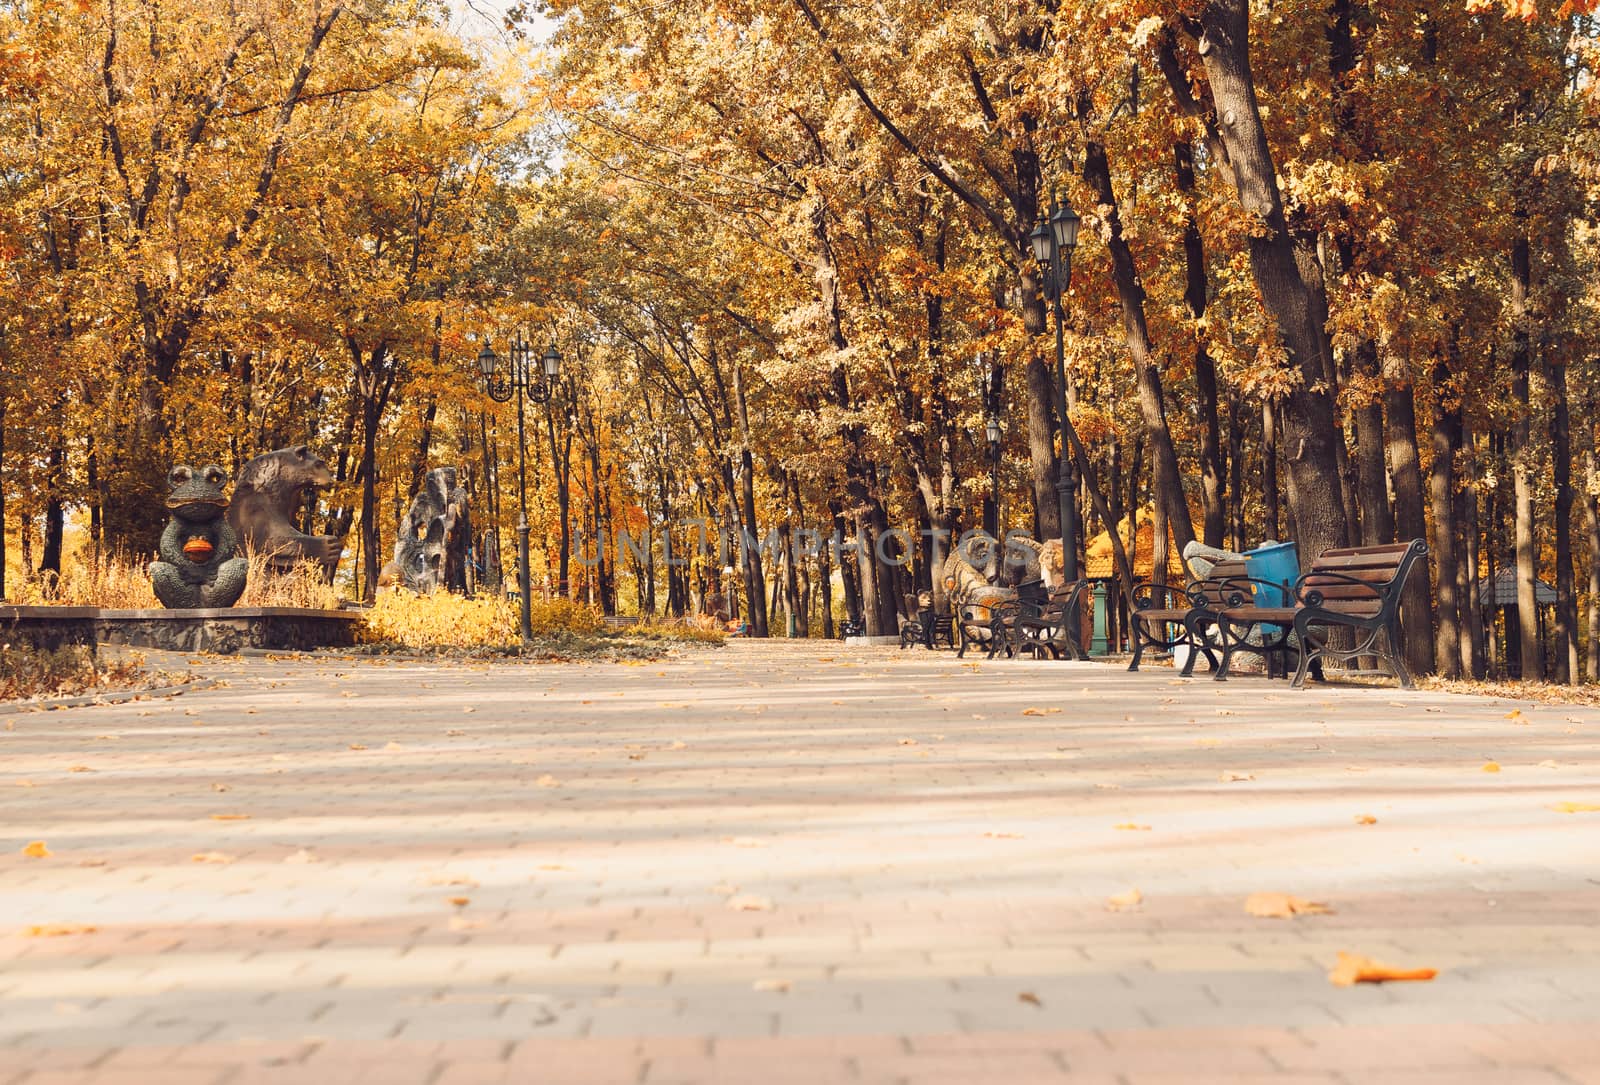 Autumn sunny landscape. Road in the park with benches. Autumn park of trees and fallen autumn leaves on the ground in the park on a sunny October day.template for design. by Alla_Morozova93